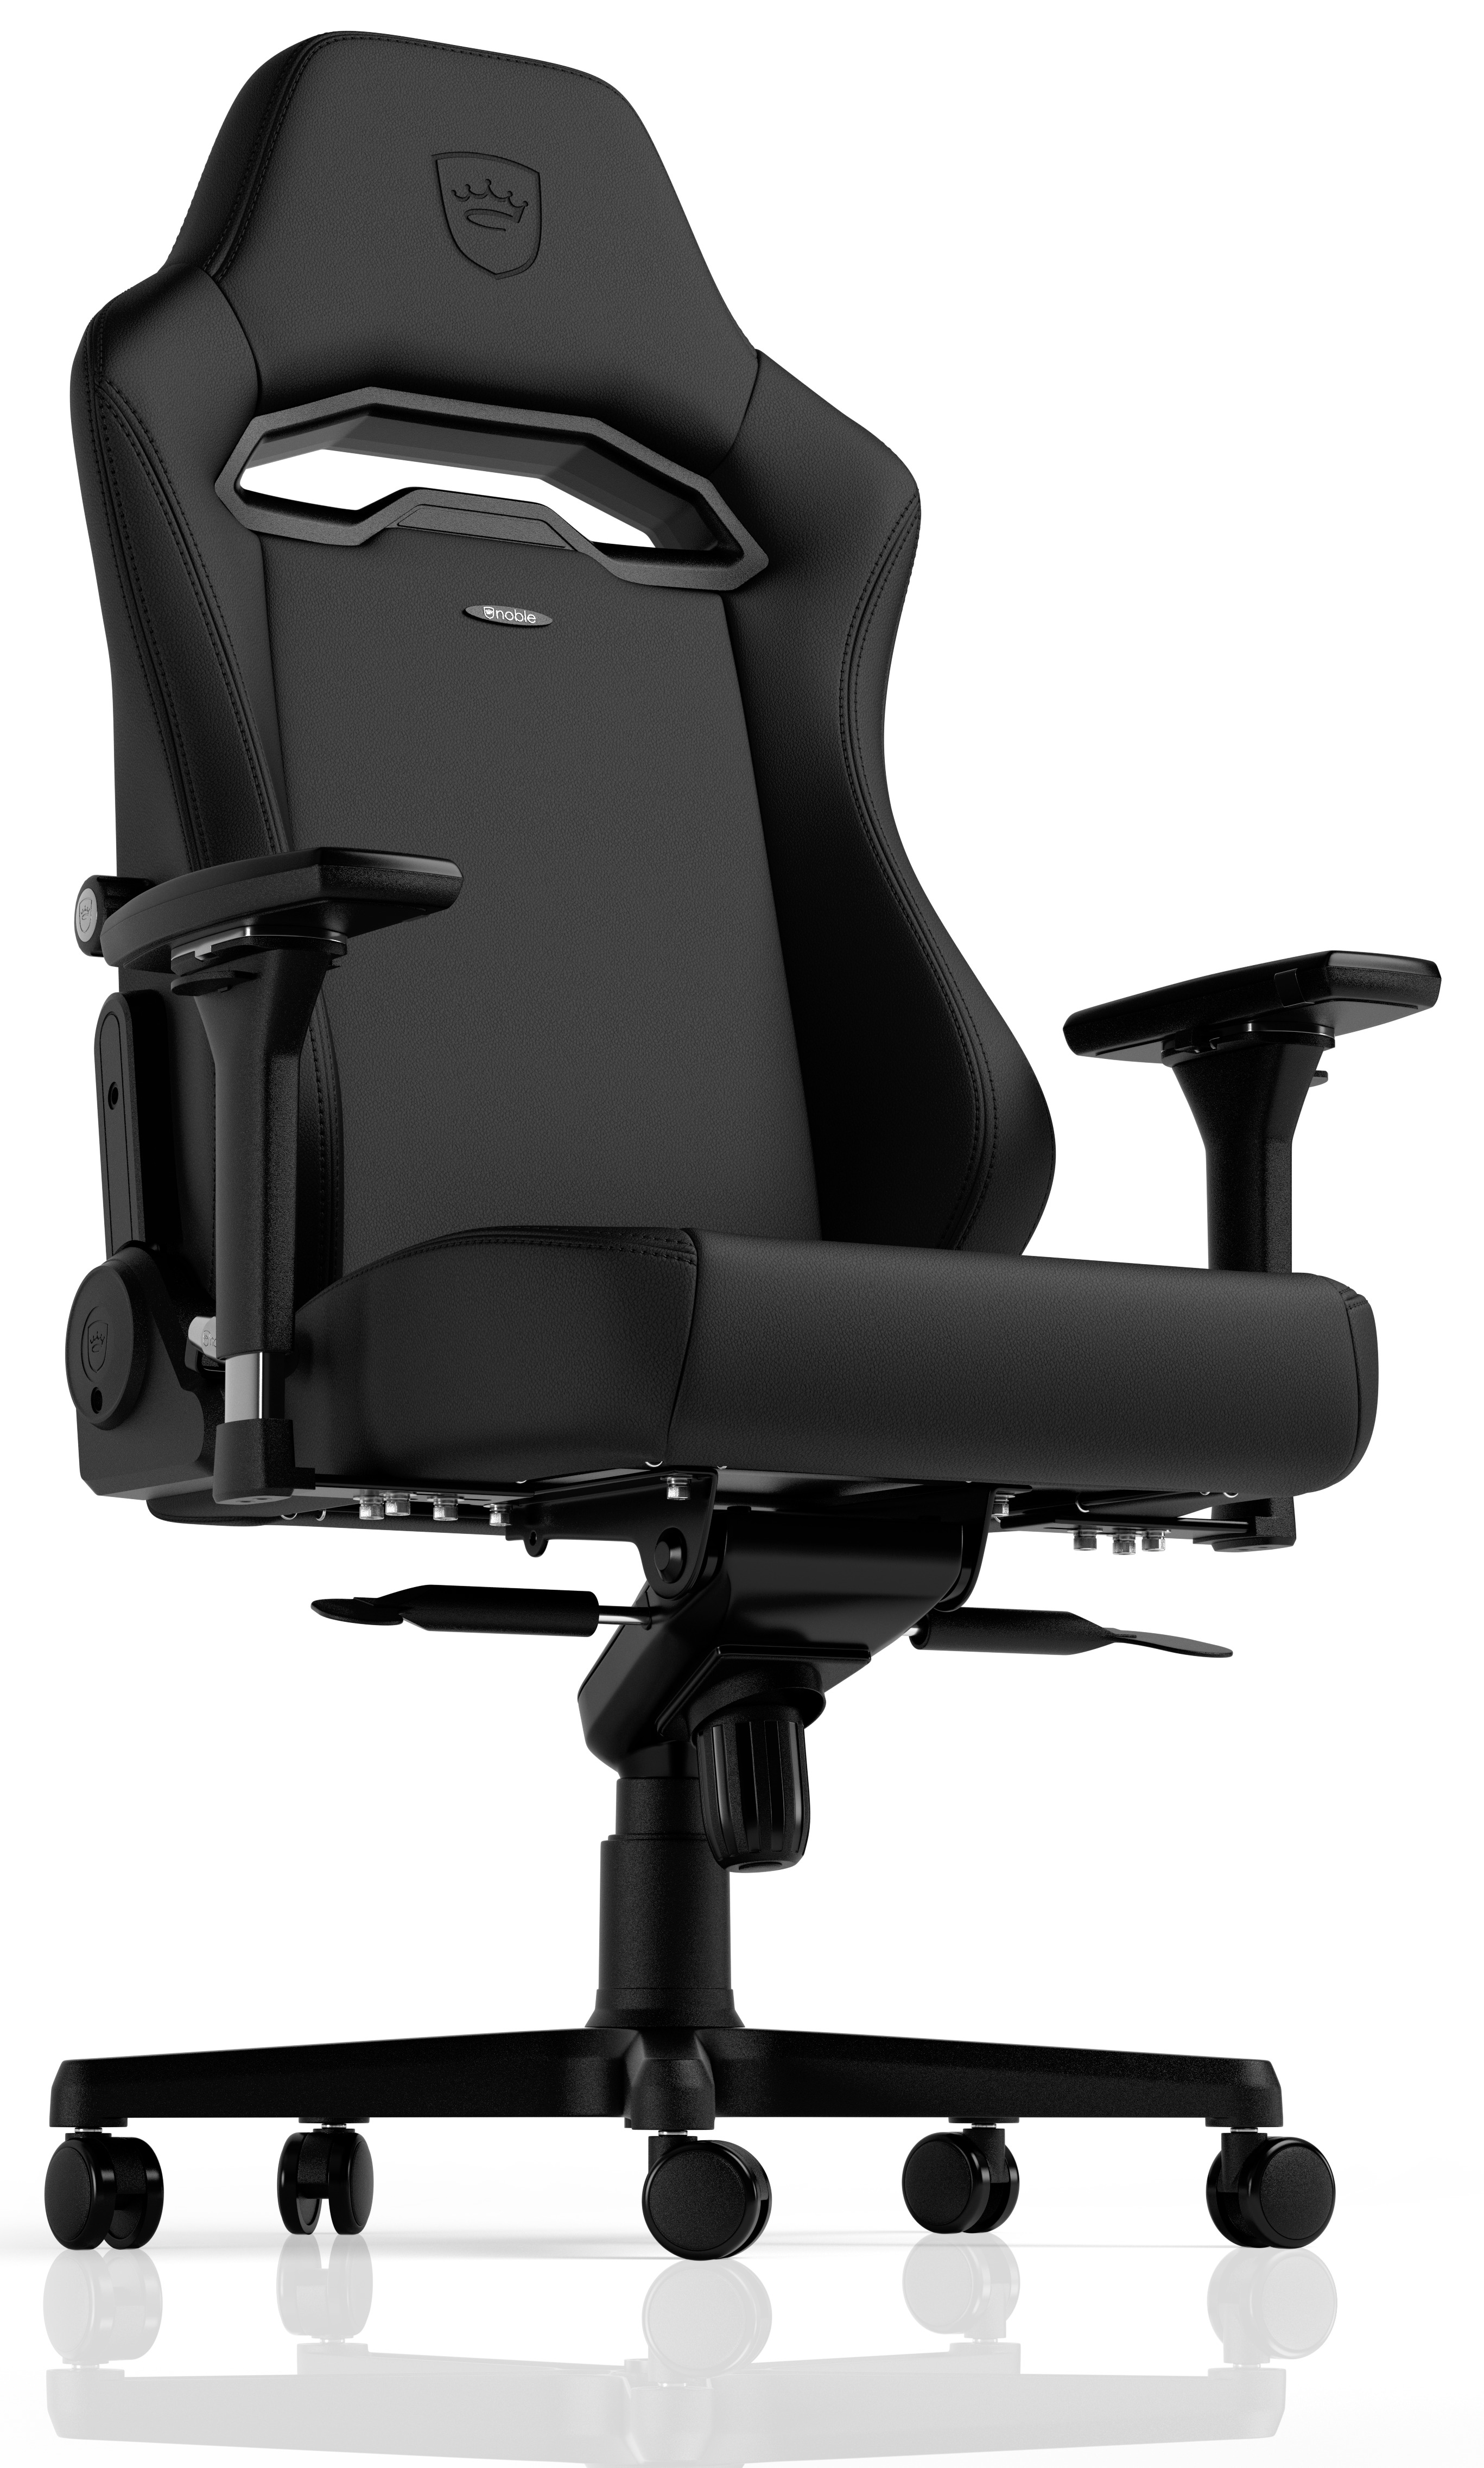 noblechairs - Cadeira noblechairs HERO ST - Black Edition